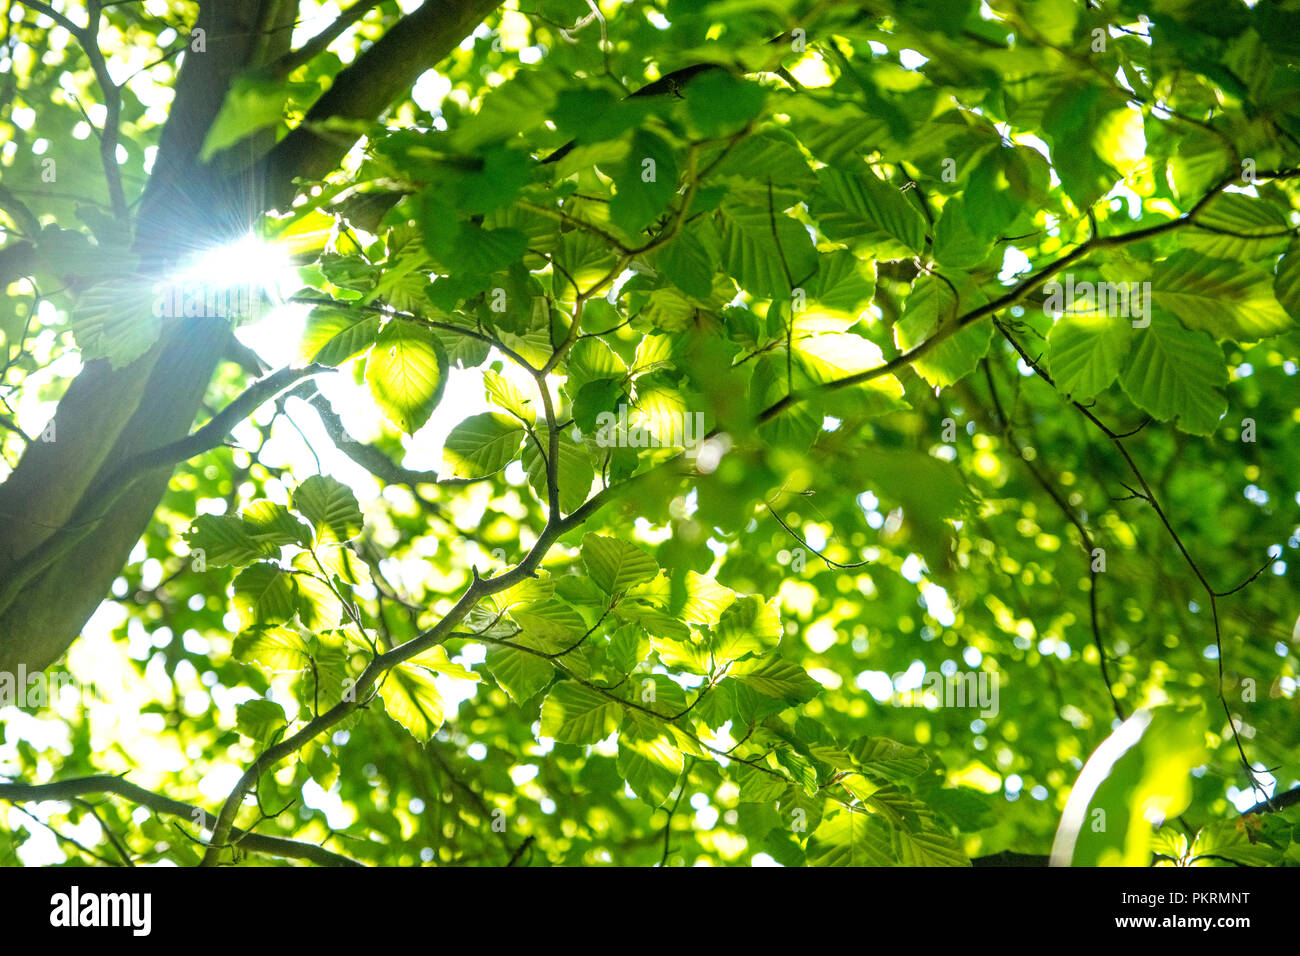 Sunlight filtering through leaves in a Peak District woodland Stock Photo